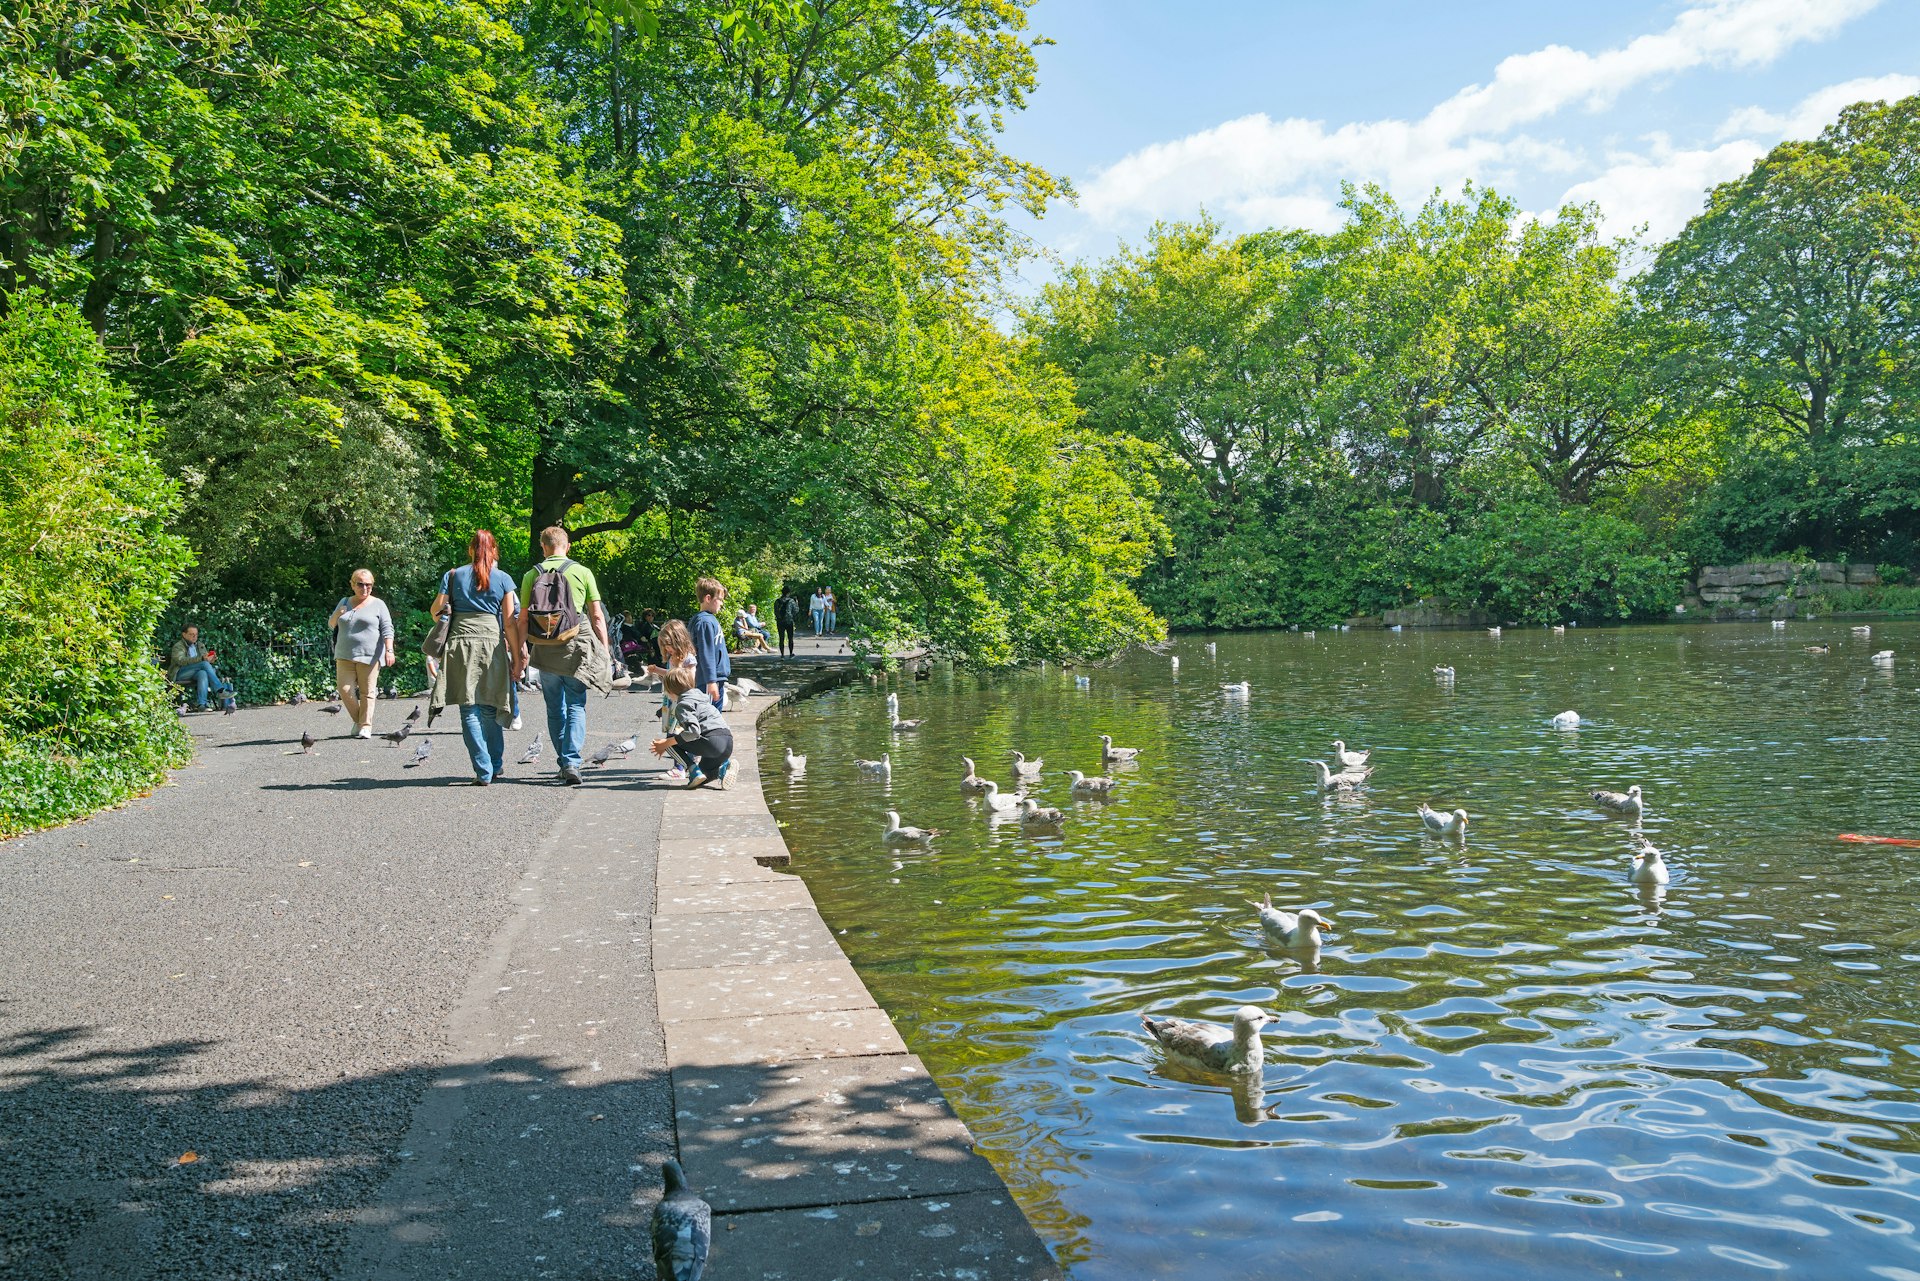 People walking along a path next to a lake at St Stephen's Green in Dublin; the path is bordered by trees and ducks are on the lake.